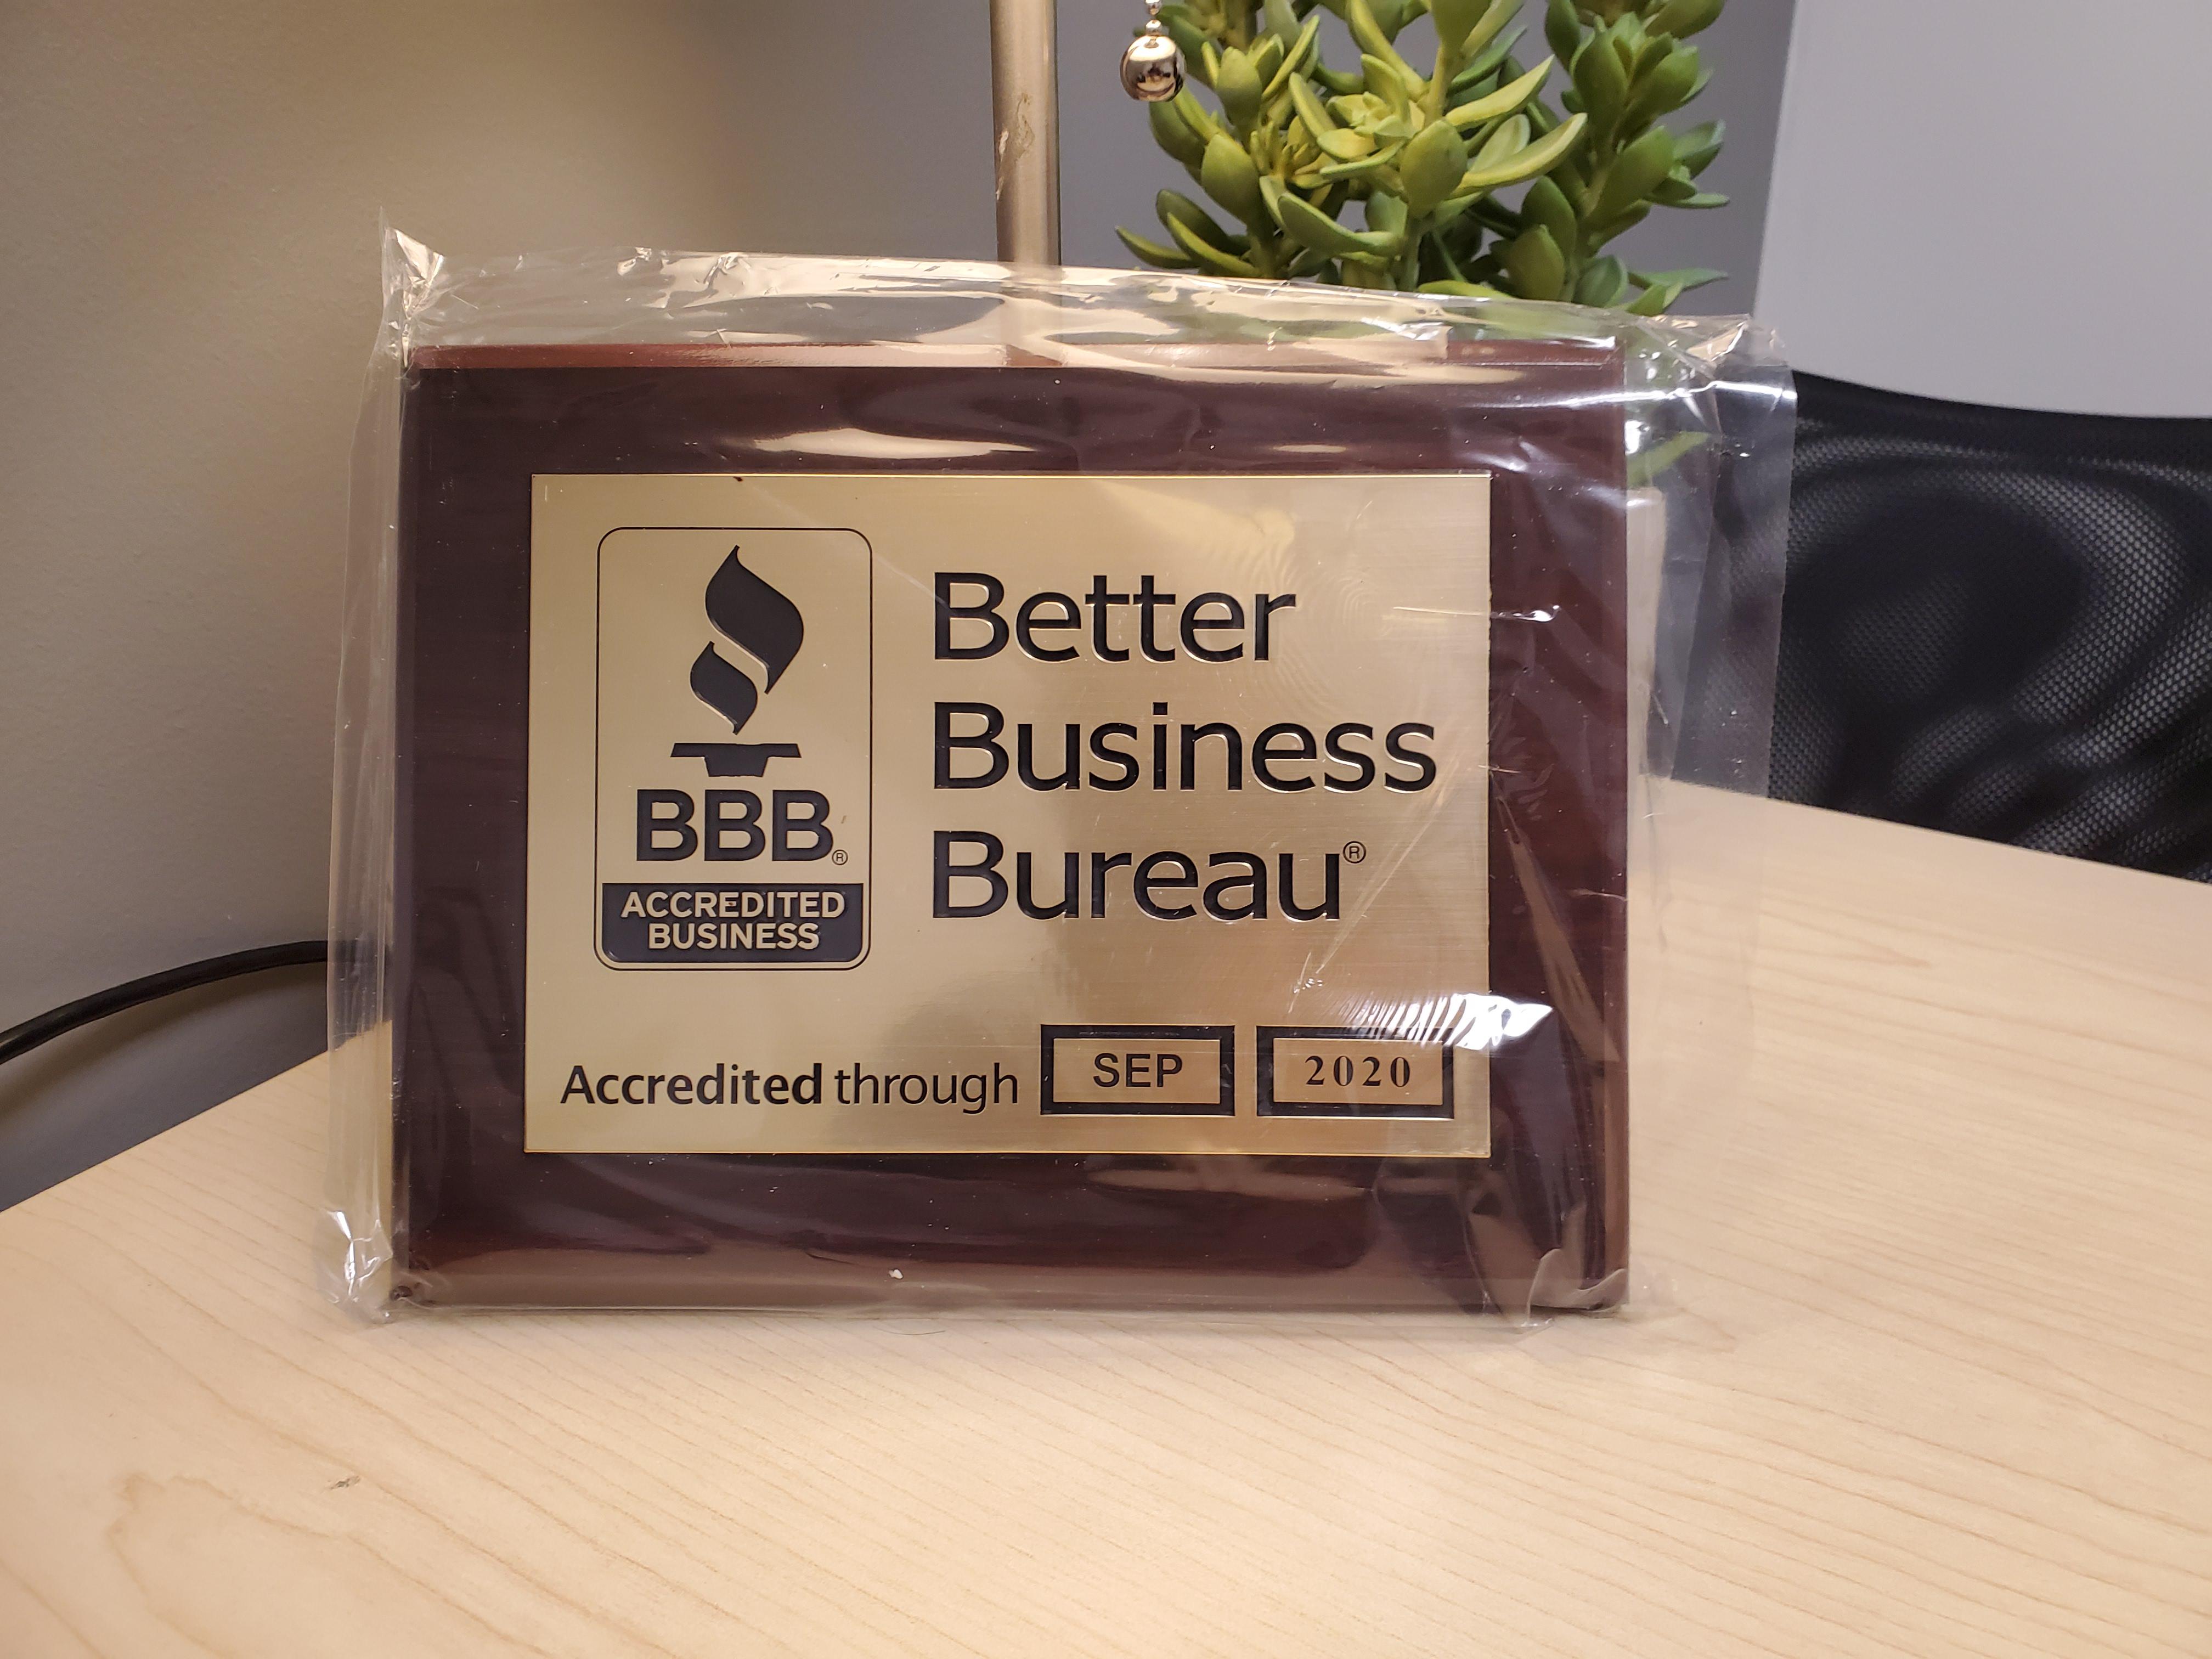 We maintain an A+ rating with the BBB. We have been listed with the BBB for years and we have a reputation for quality and reliability. We strive to be the best web designer and marketers in the business.